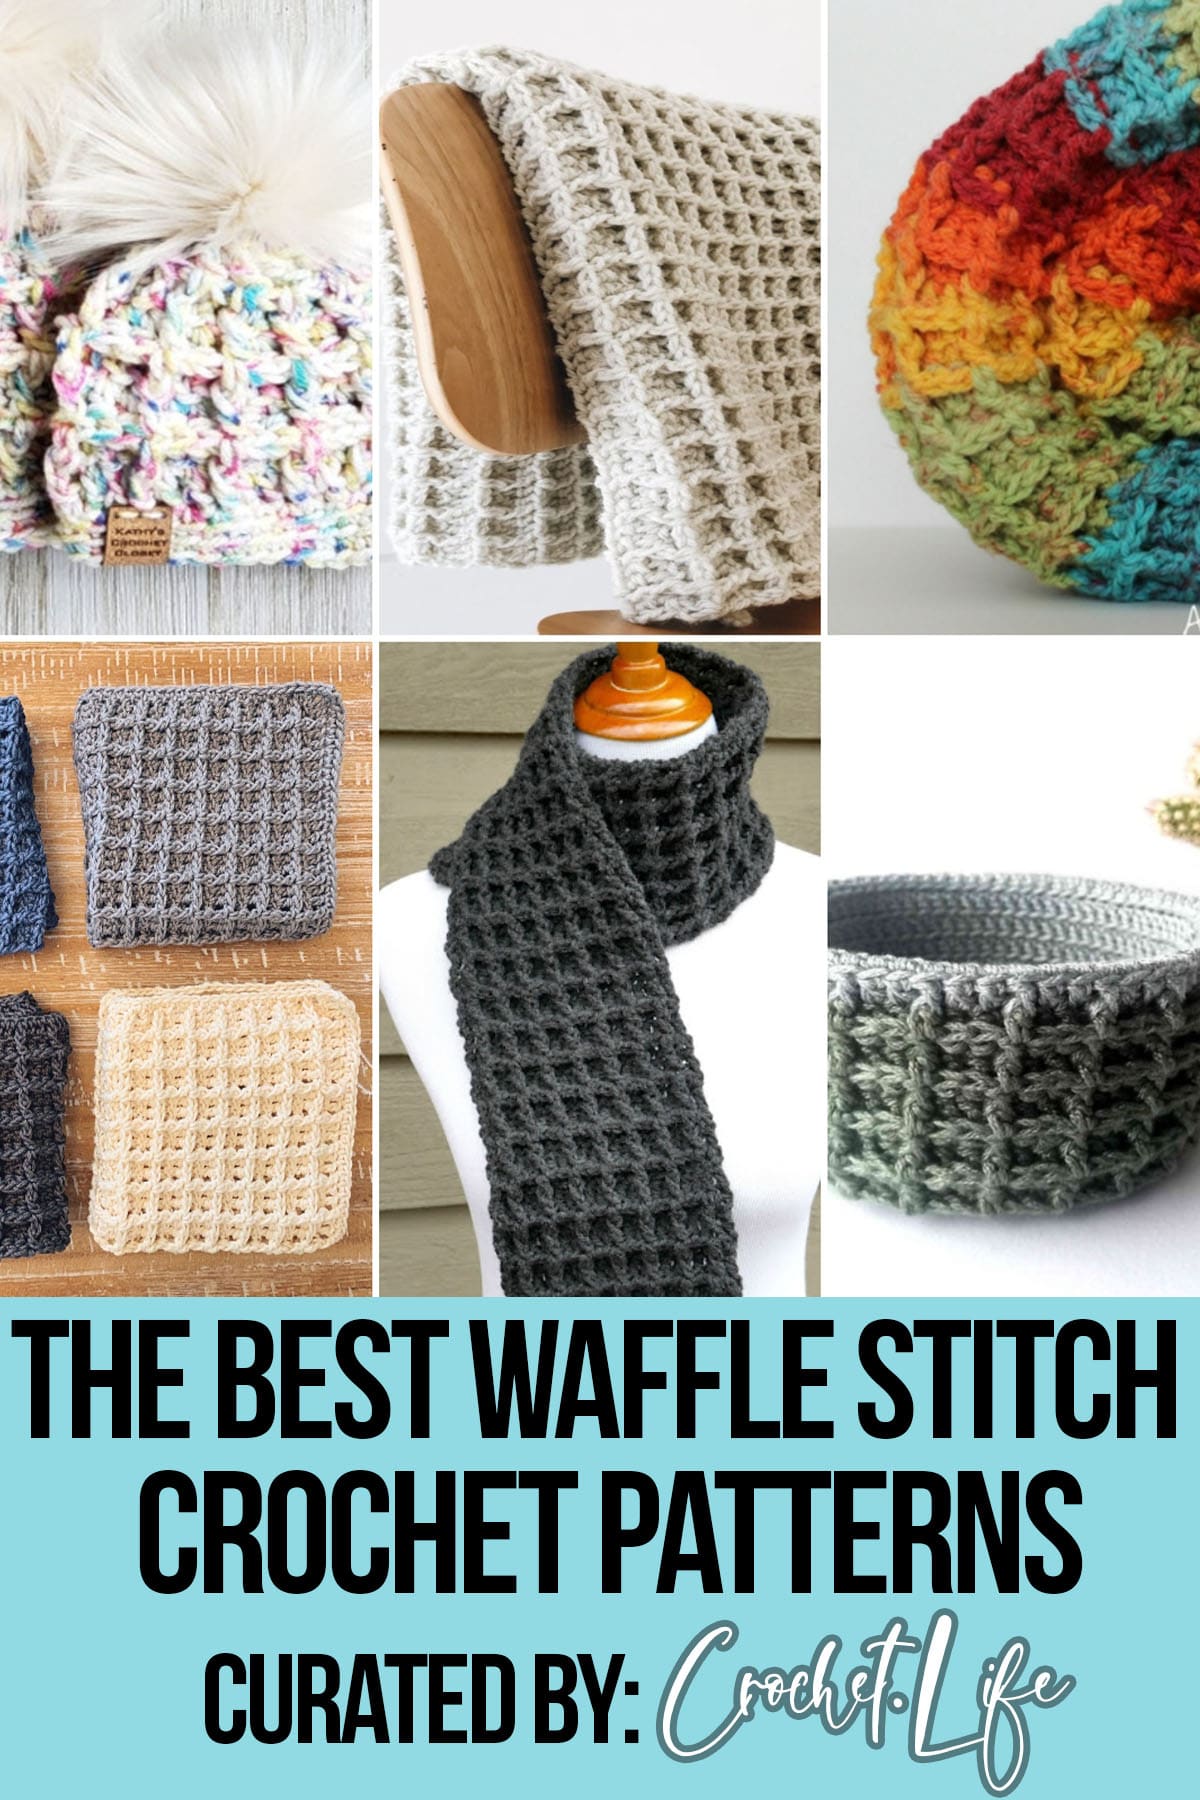 photo collage of crochet patterns using waffle stitch with text which reads the best waffle stitch crochet patterns curated by crochet.life